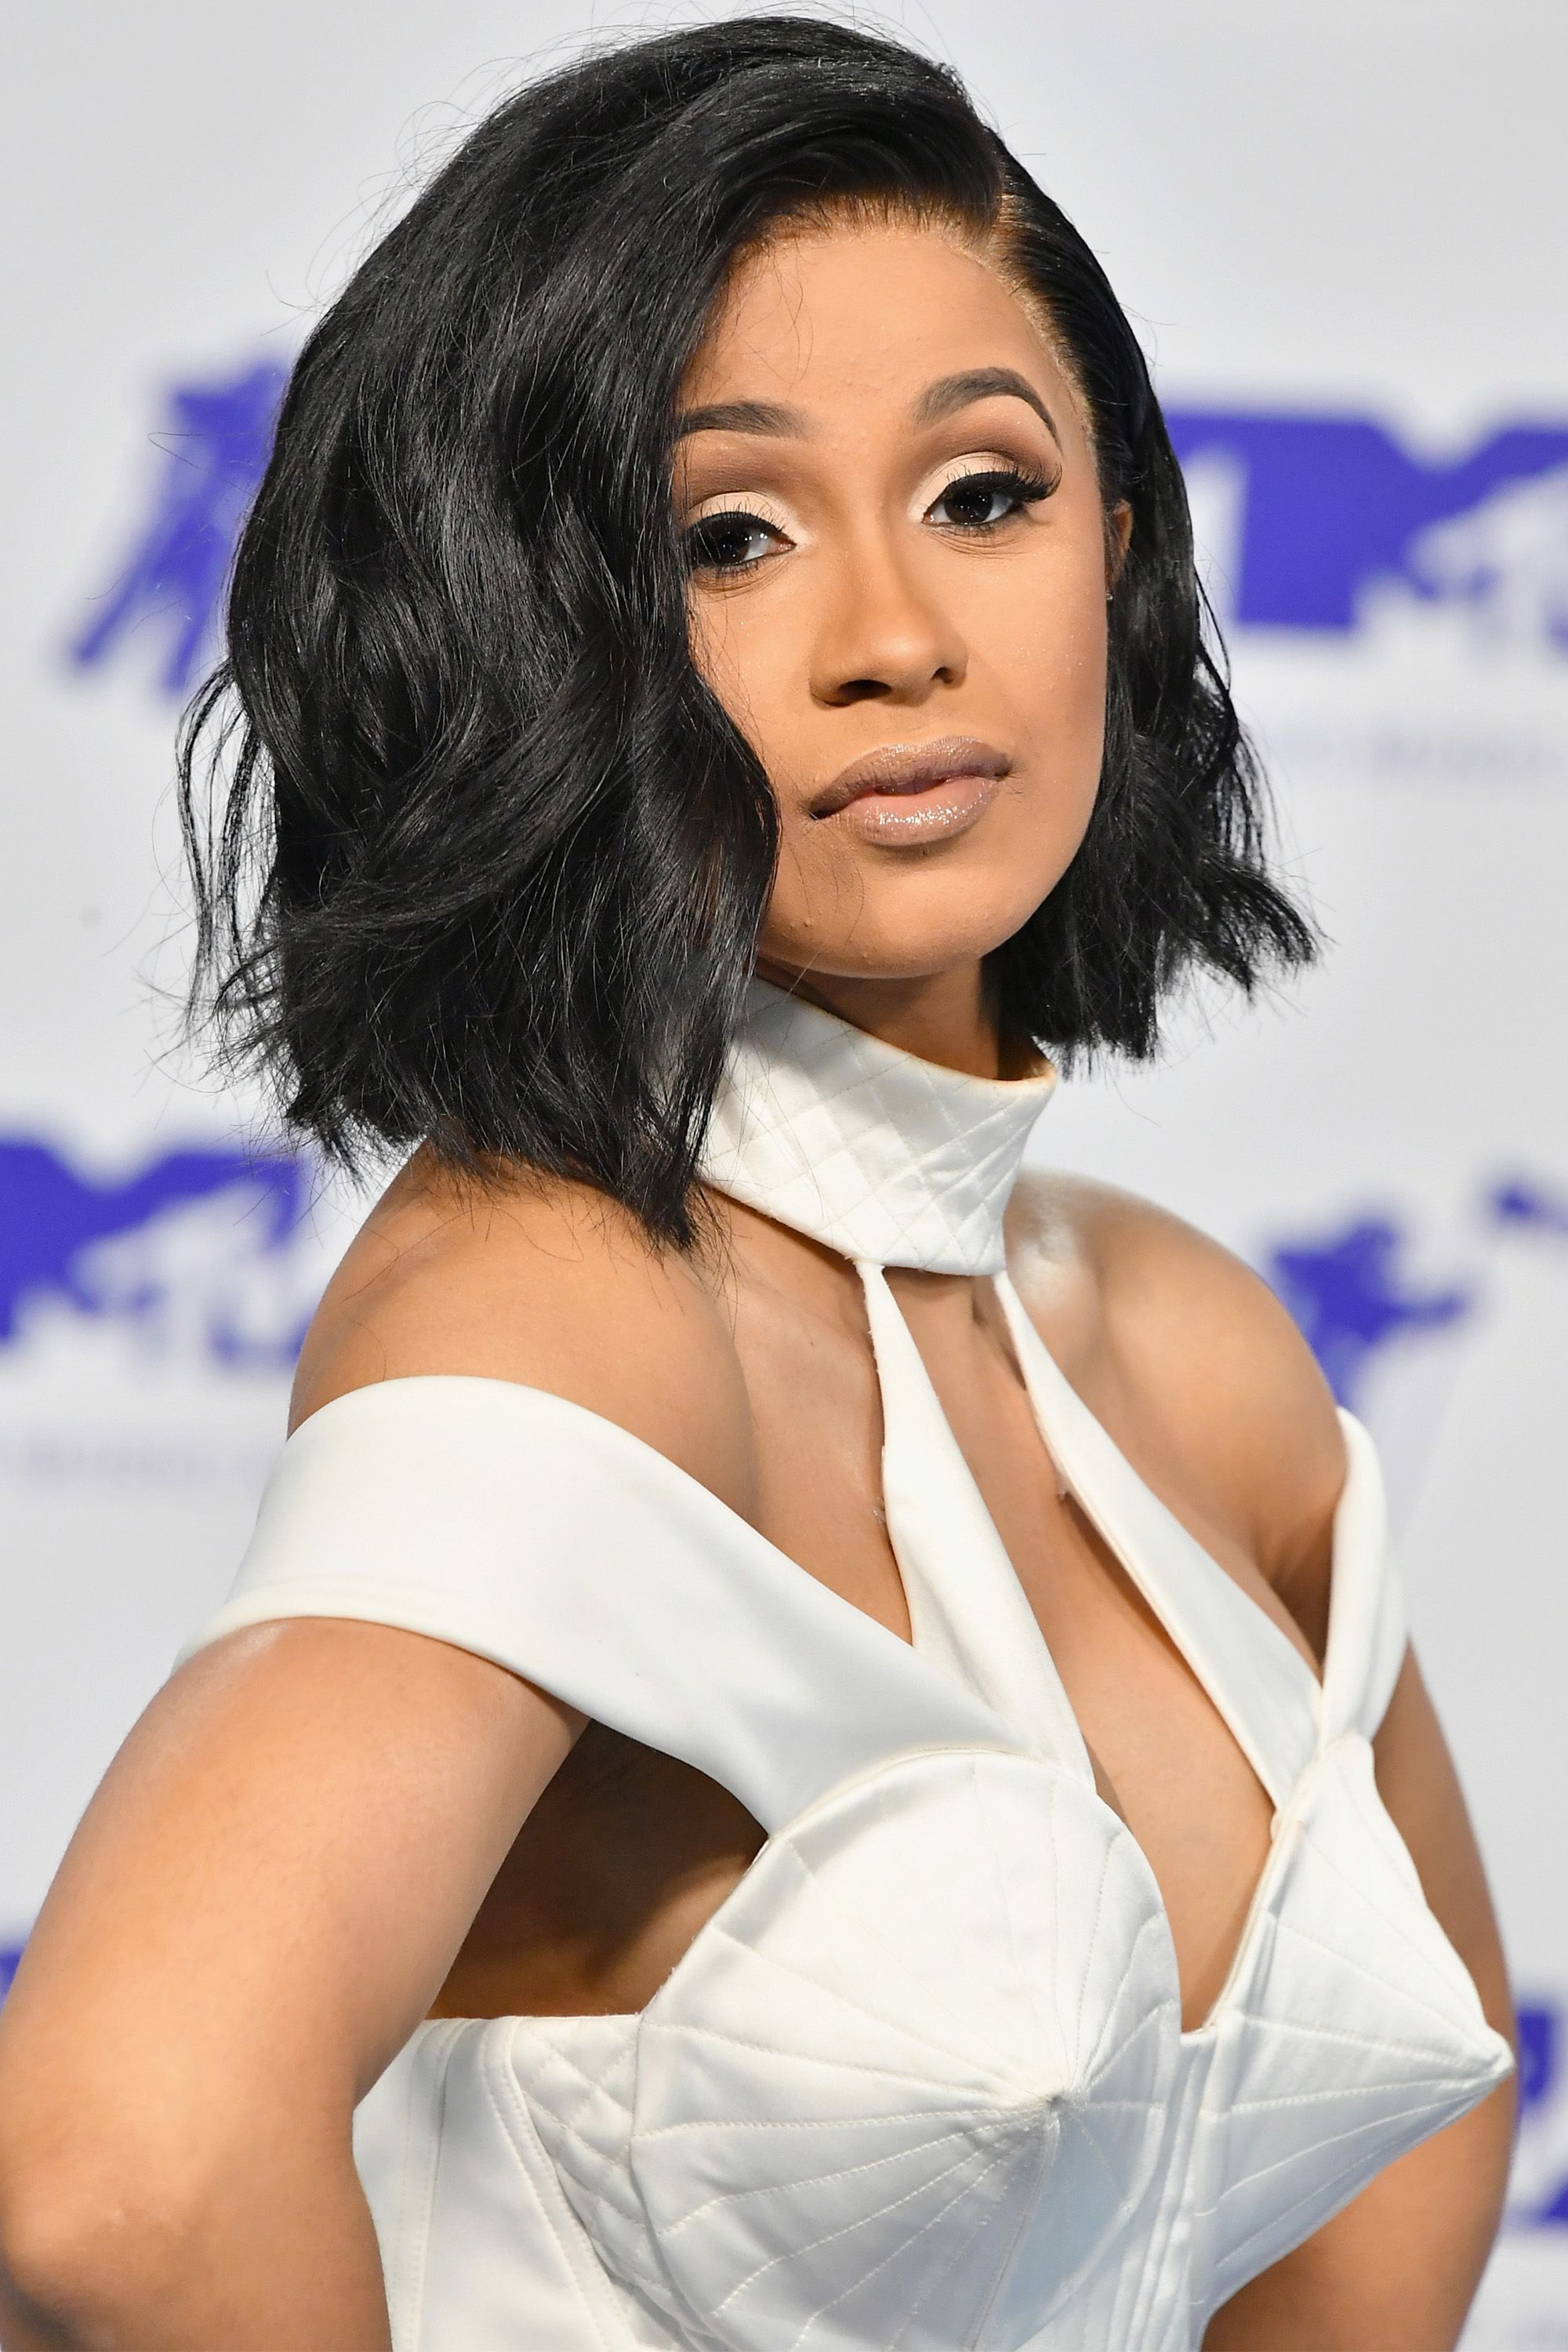 Cardi B facts: Everything you need to know about the US rapper